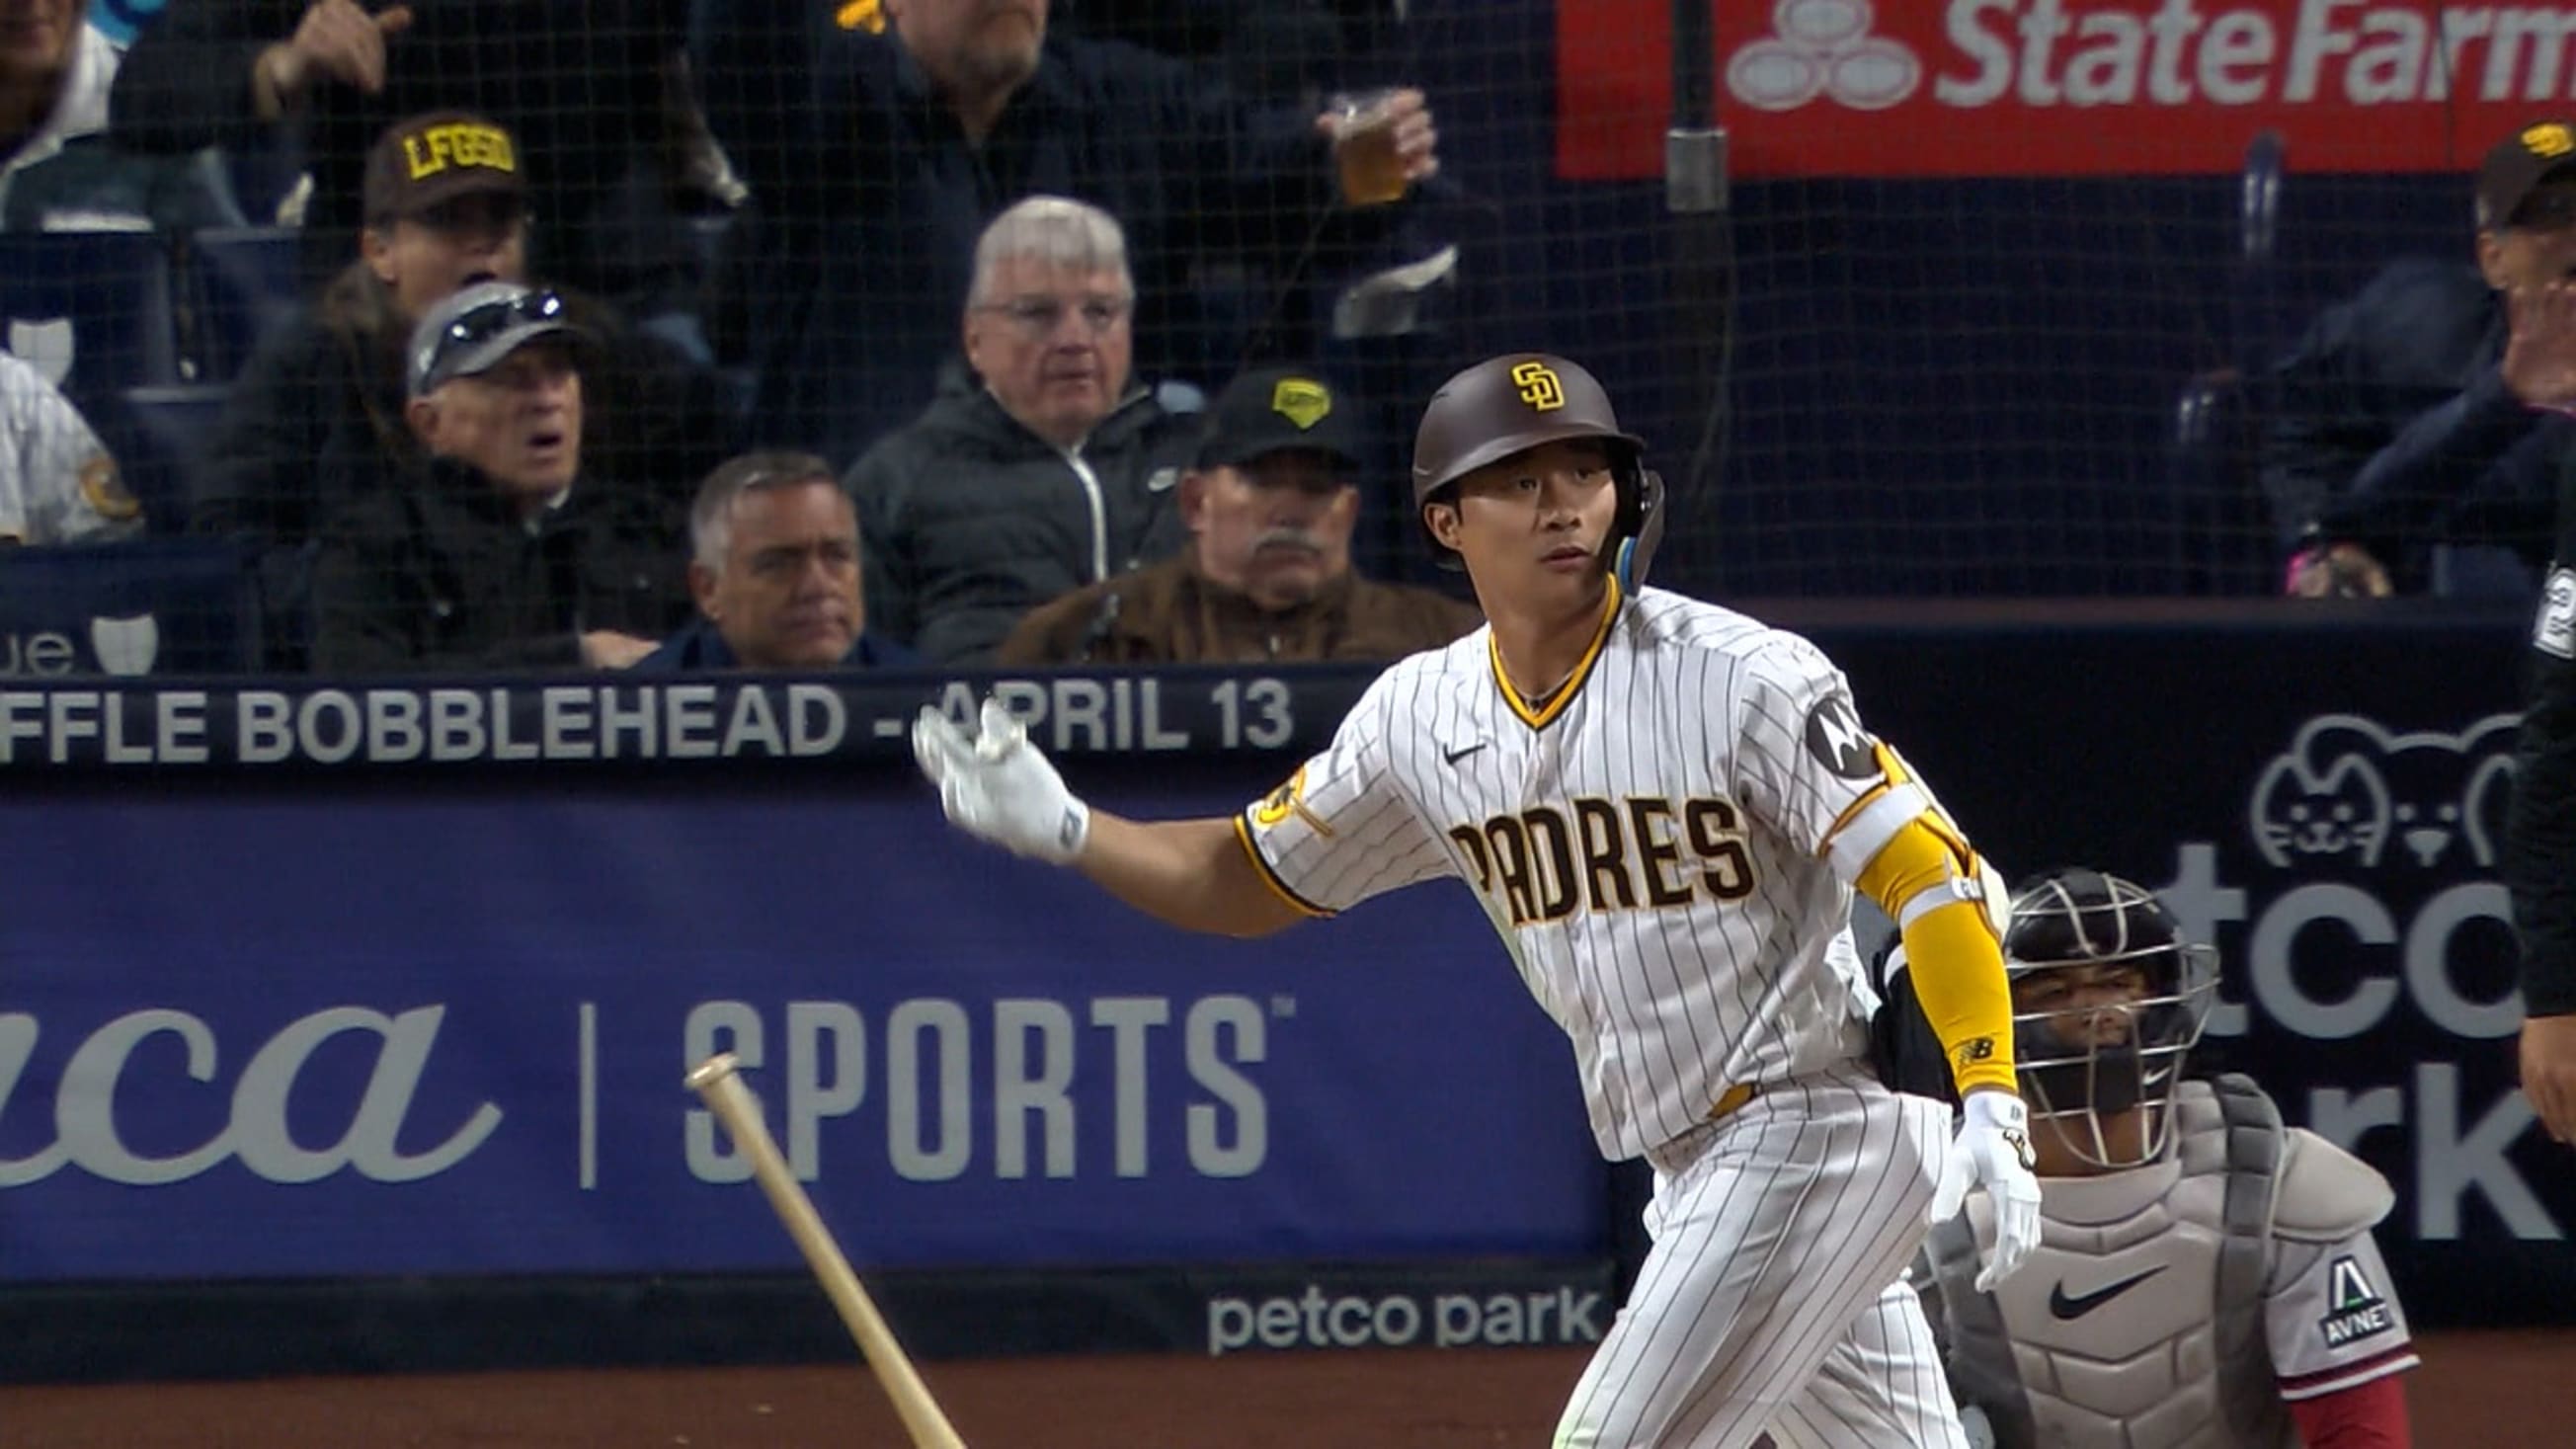 The Korean call of Ha-Seong Kim's walk-off is ABSOLUTELY ELECTRIC